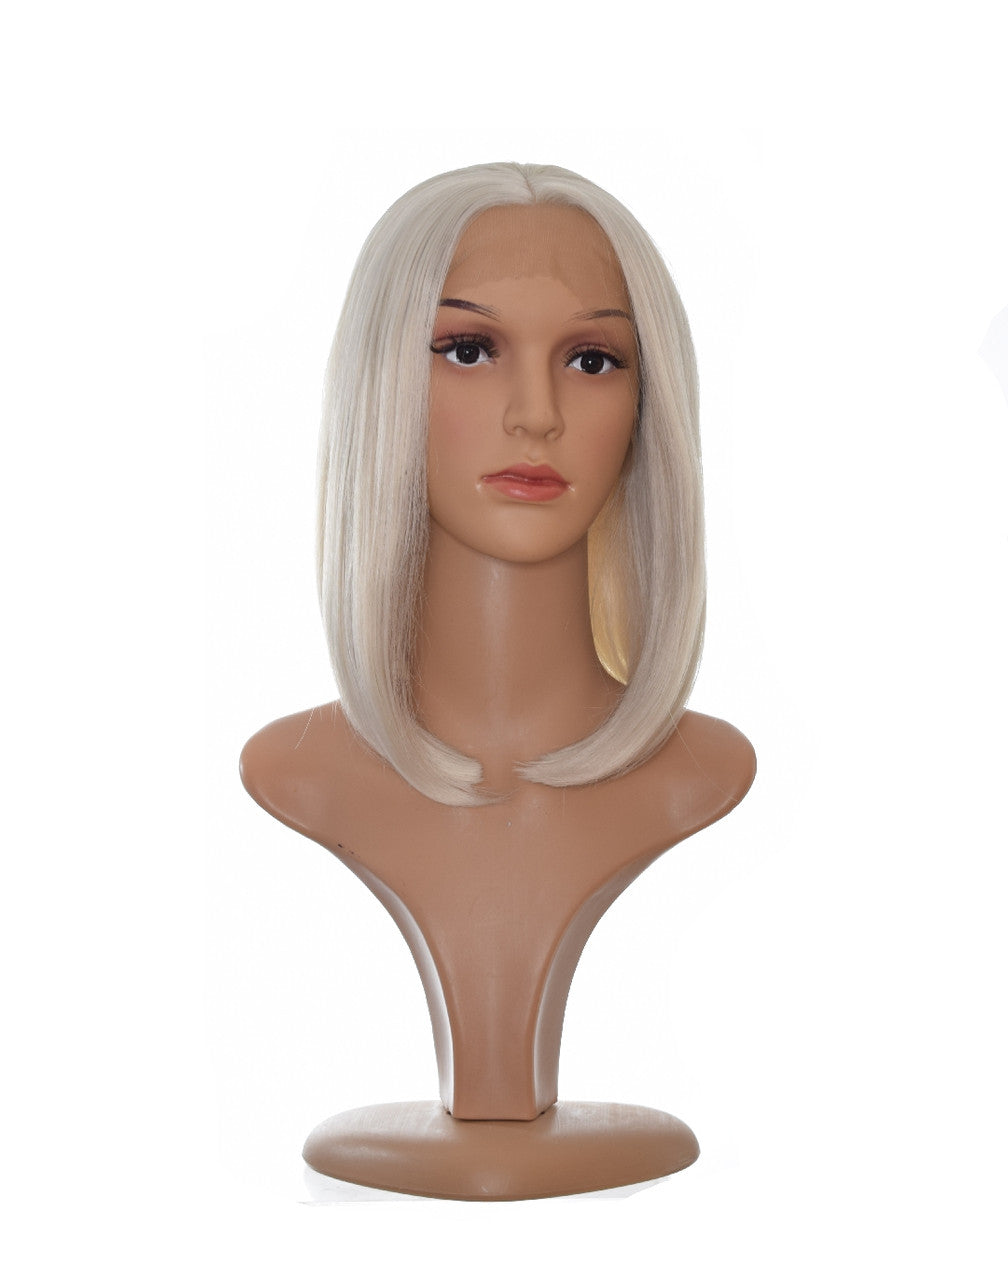 Blonde Centre Parting Lace  Wig. Sleek Straight Bob Style Wig.